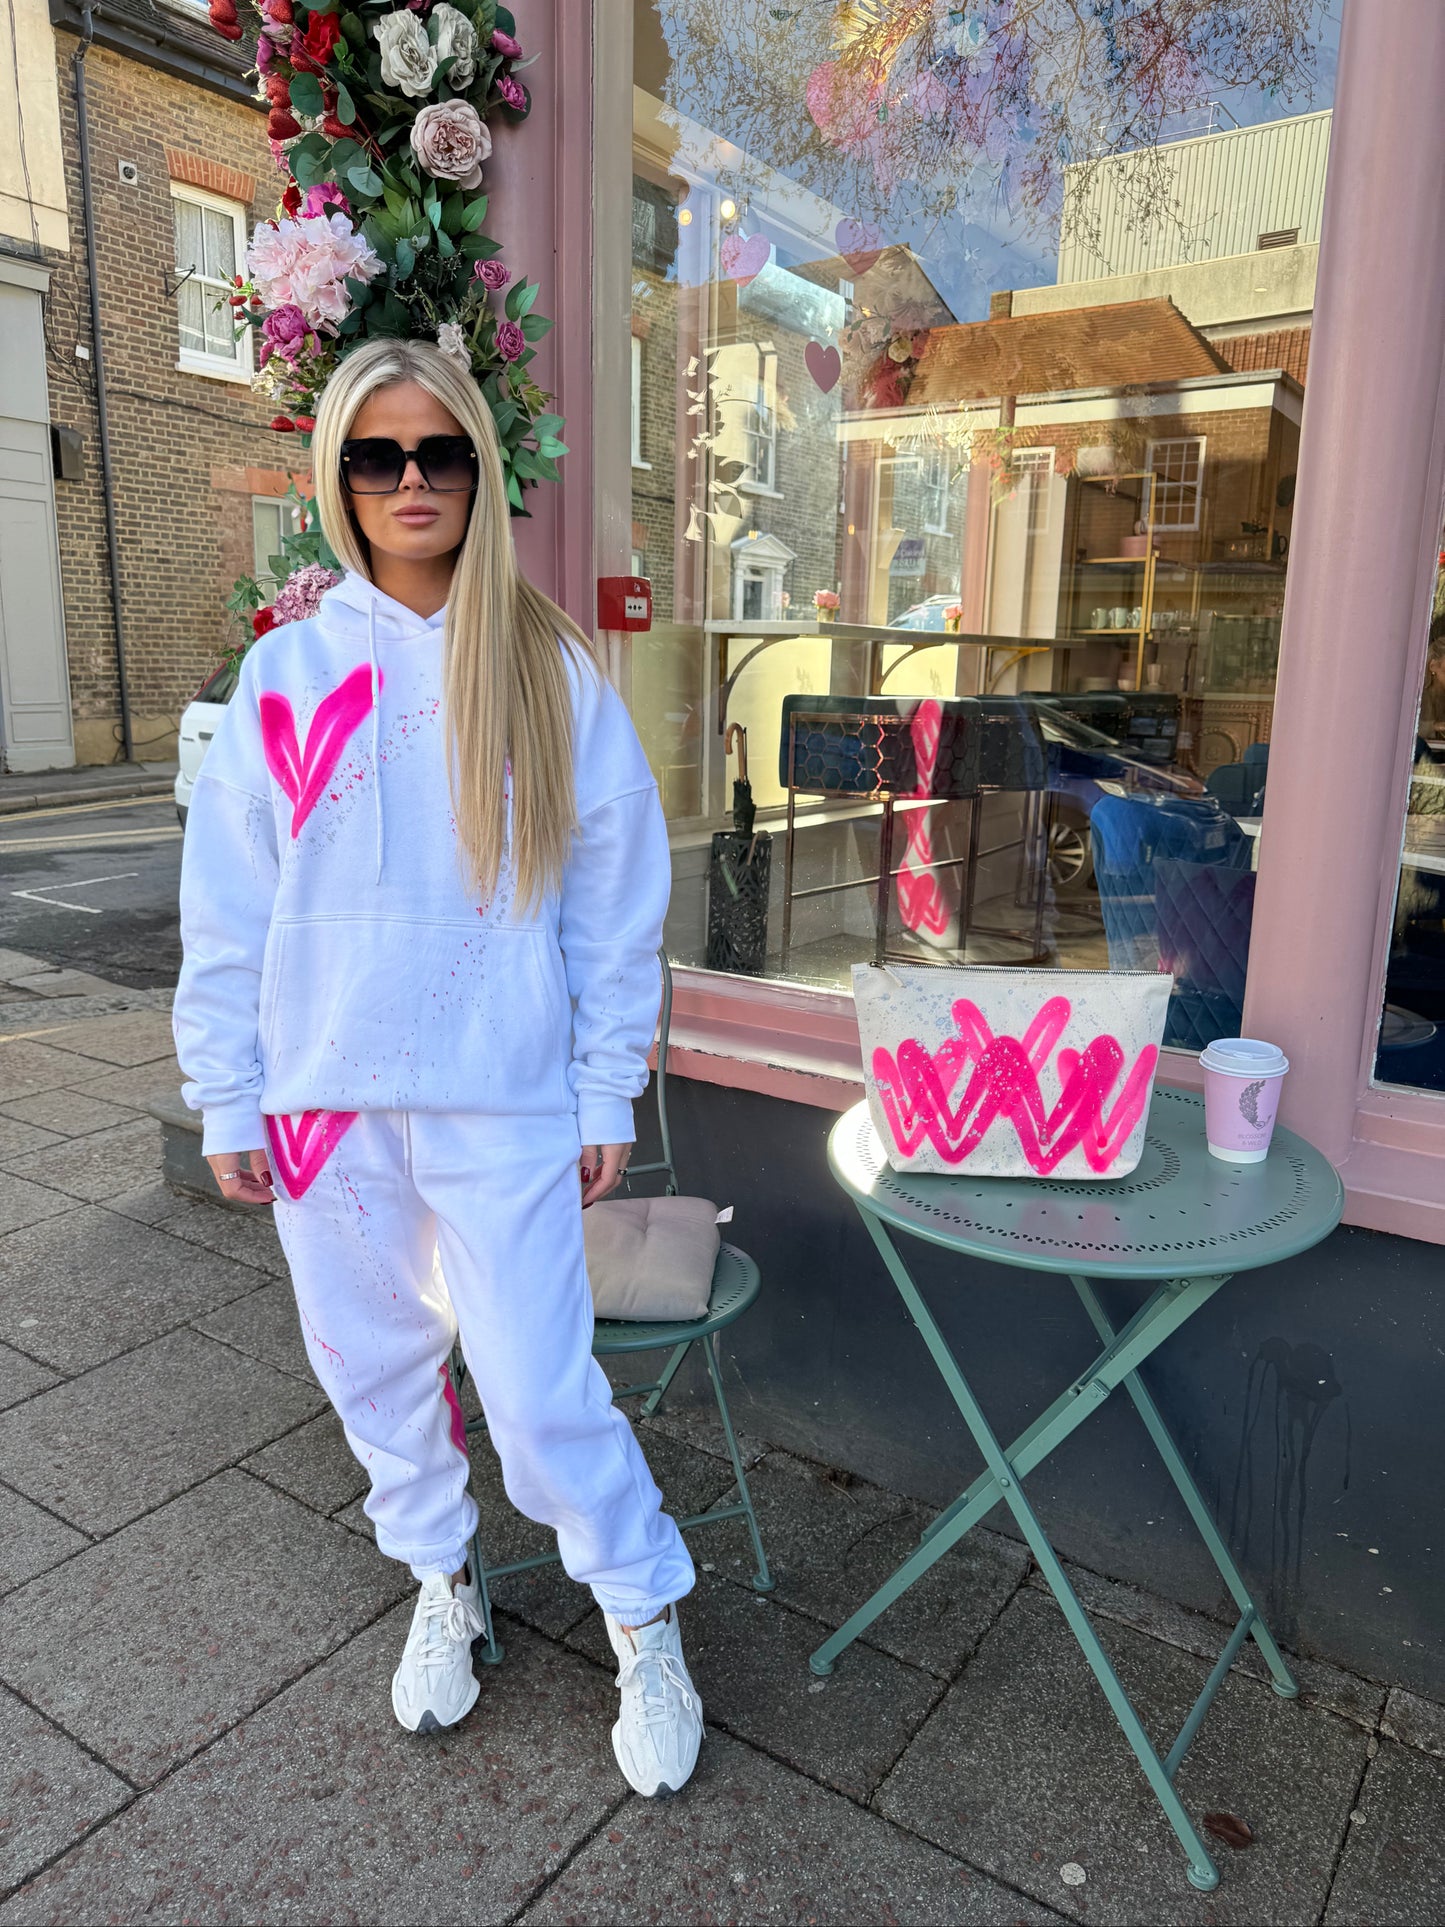 Hot Pink Heart Sprayed Hooded Tracksuit